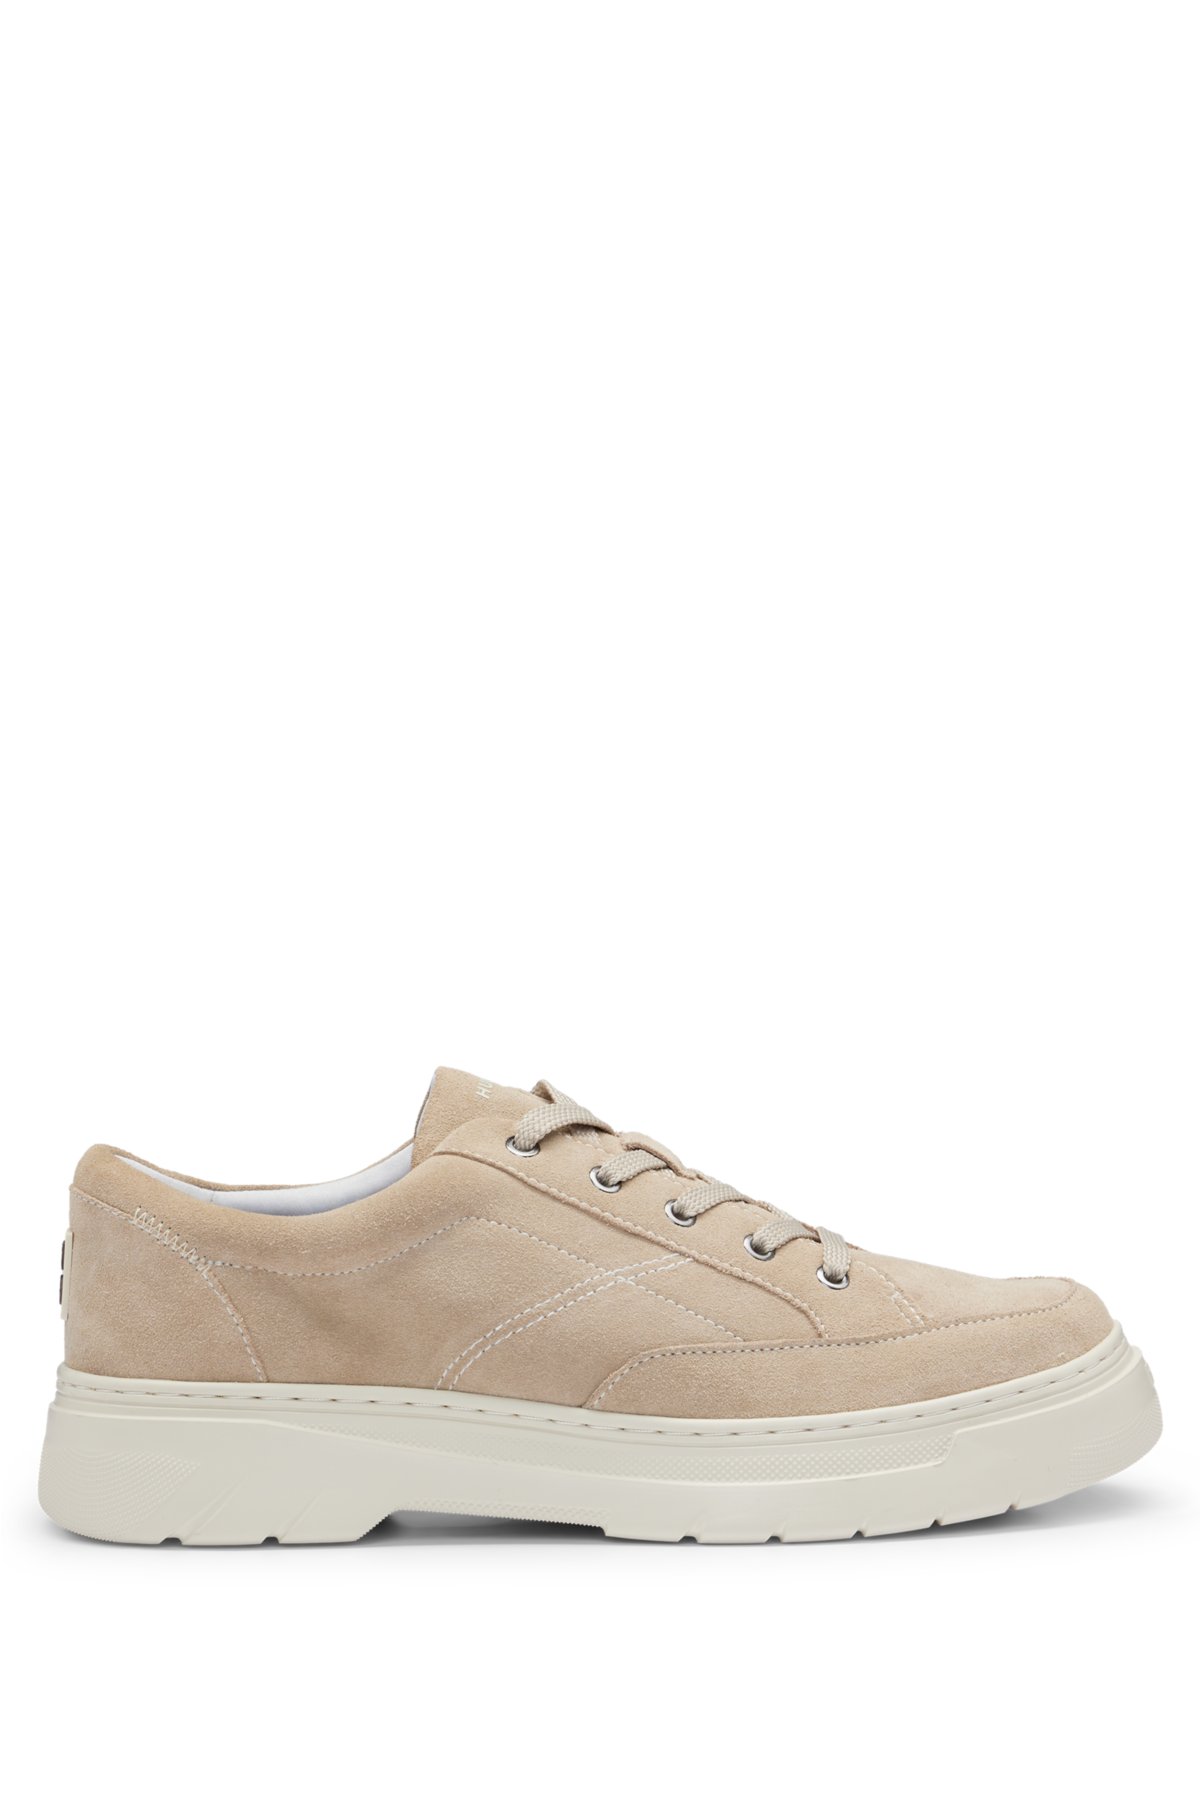 Suede Derby shoes with EVA sole, Beige